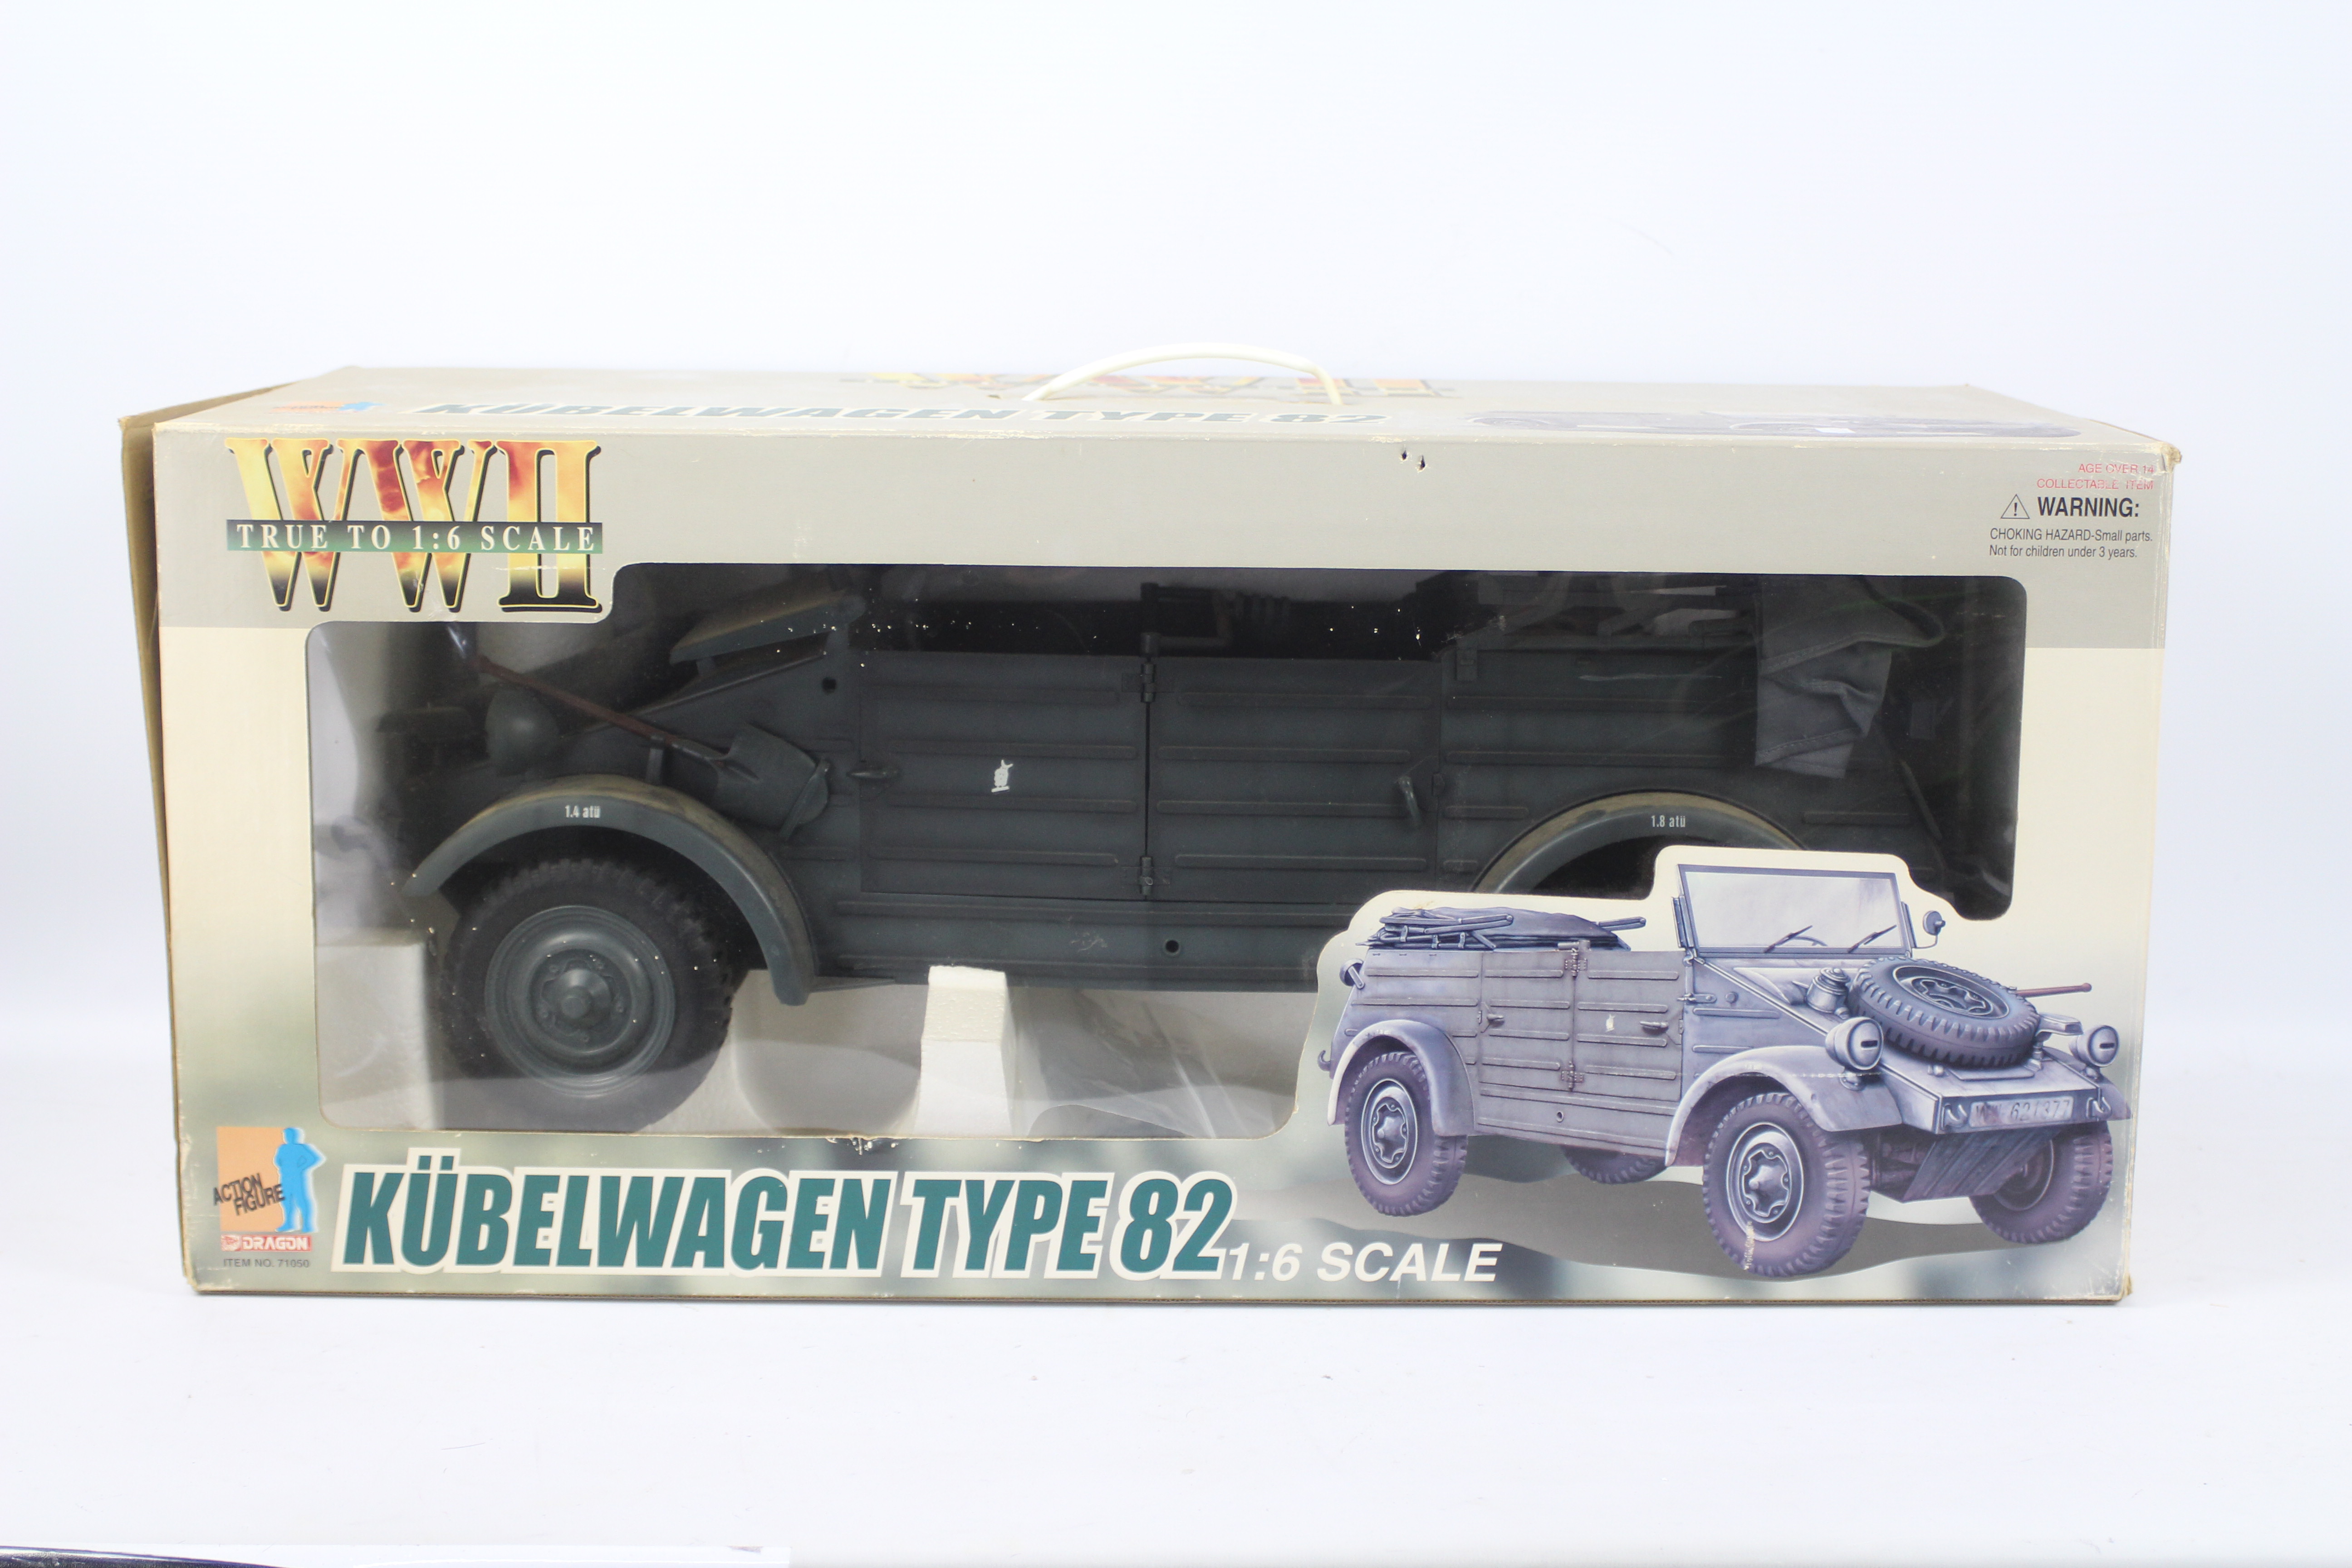 Dragon - A boxed Dragon #710150 WWII German Forces 1:6 scale Kubelwagen Type 82. - Image 10 of 10